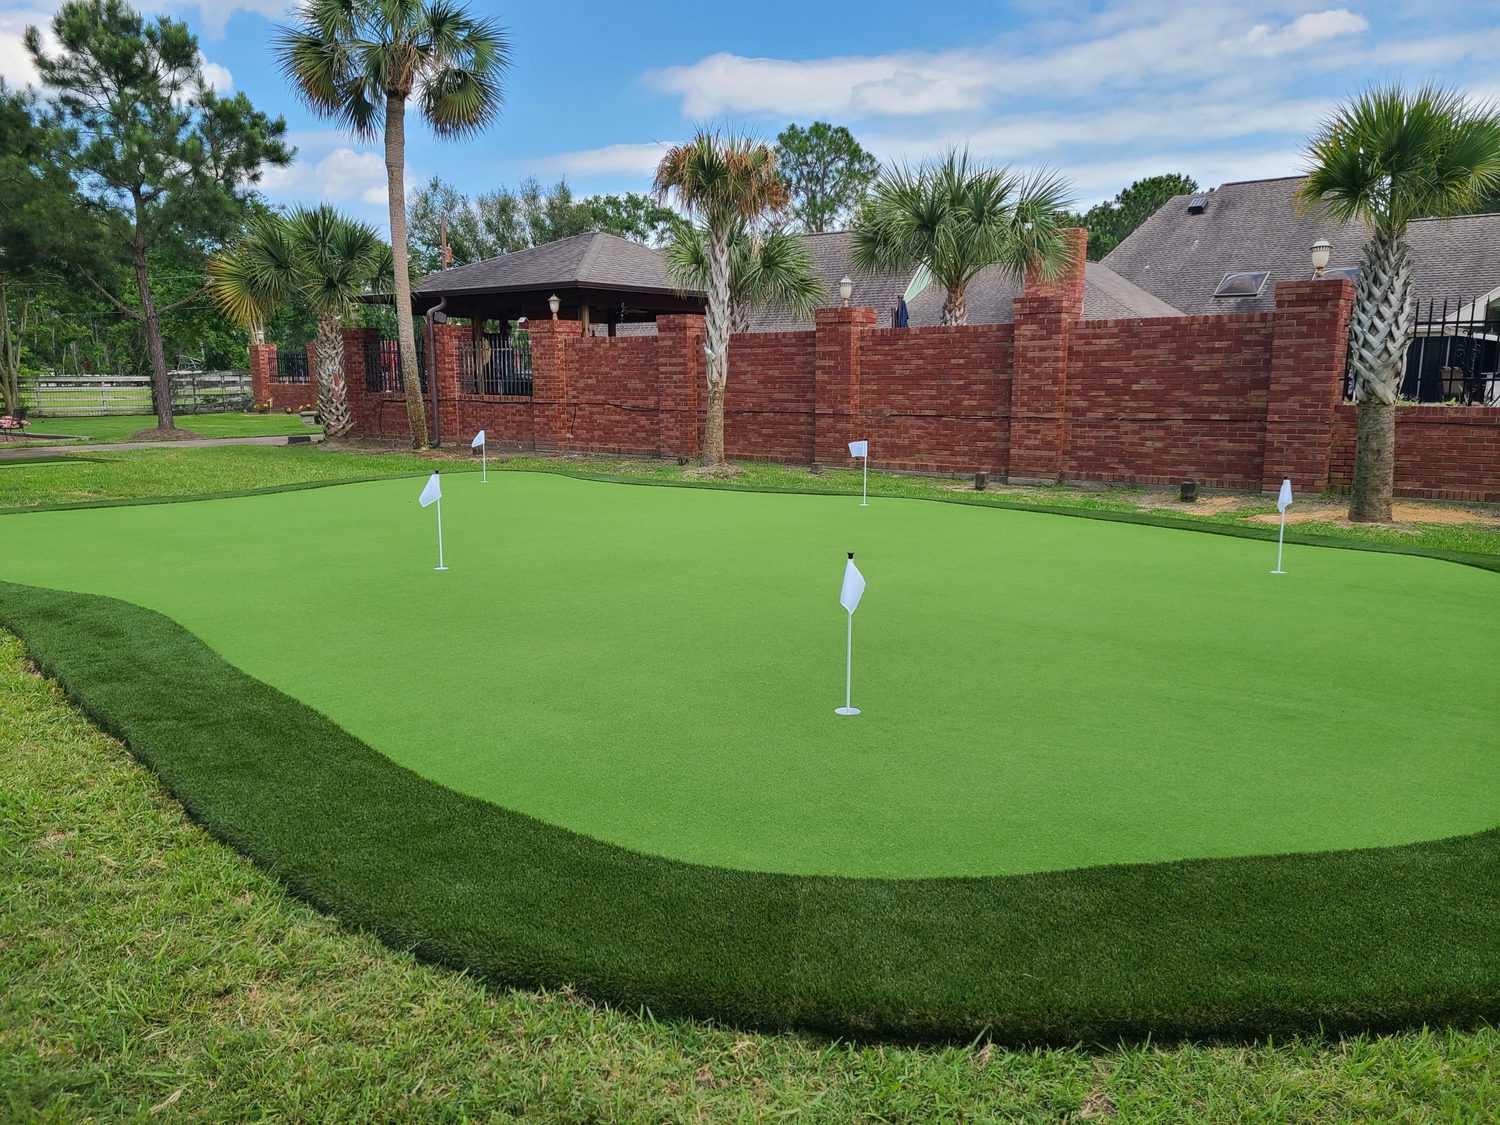 putting green installation grass landscaping work done in Houston, Texas residence